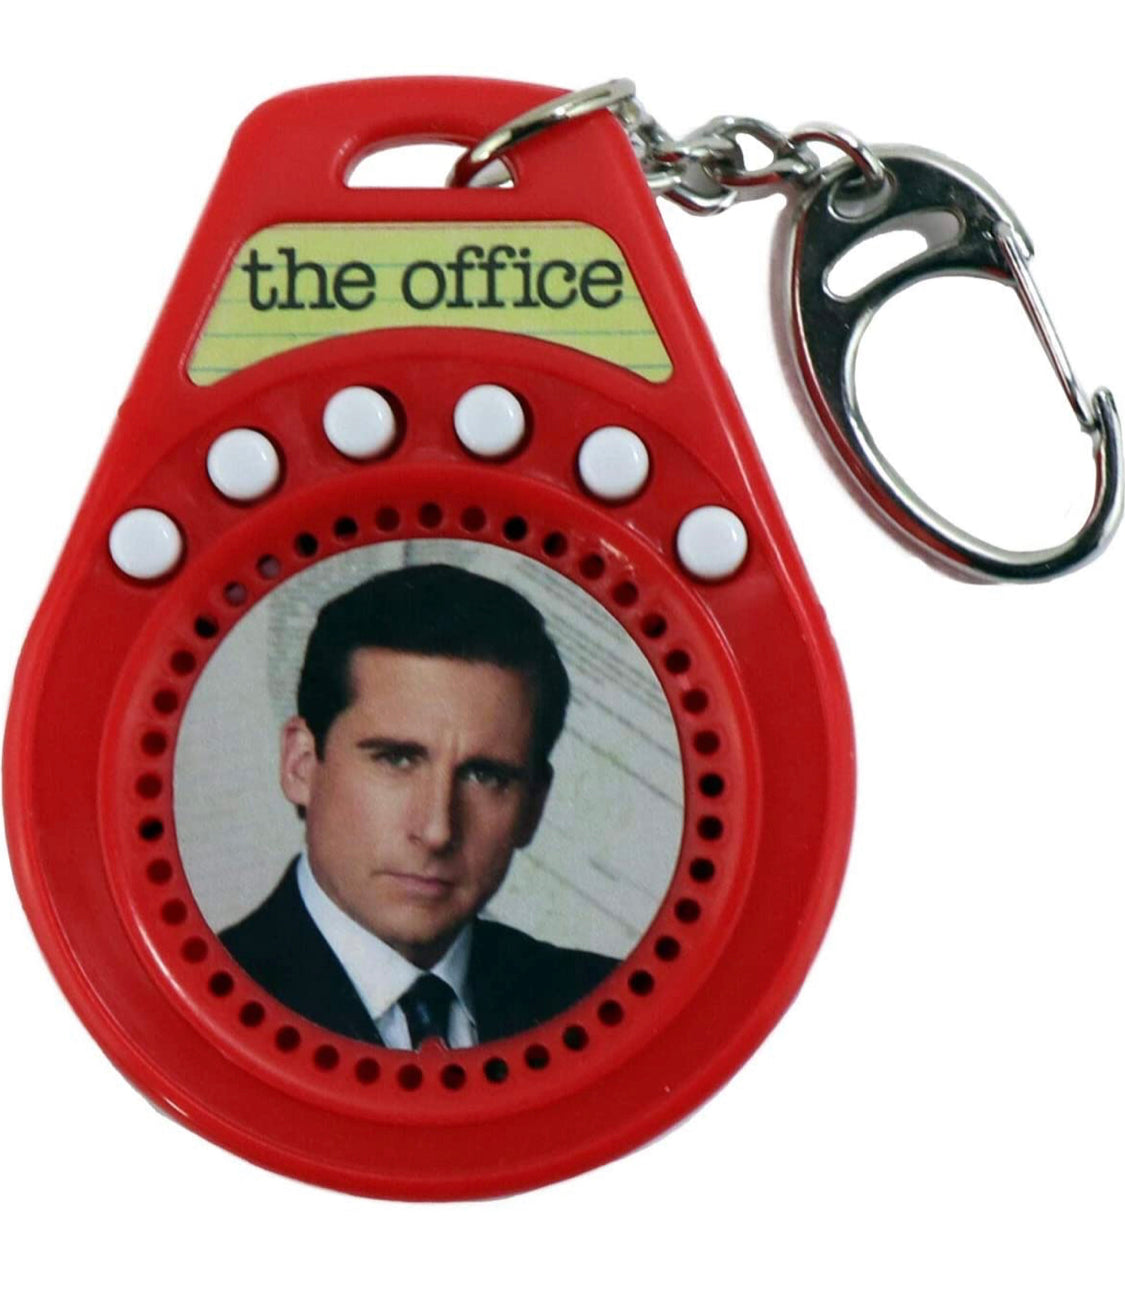 World’s Coolest Talking Key Chain - The Office